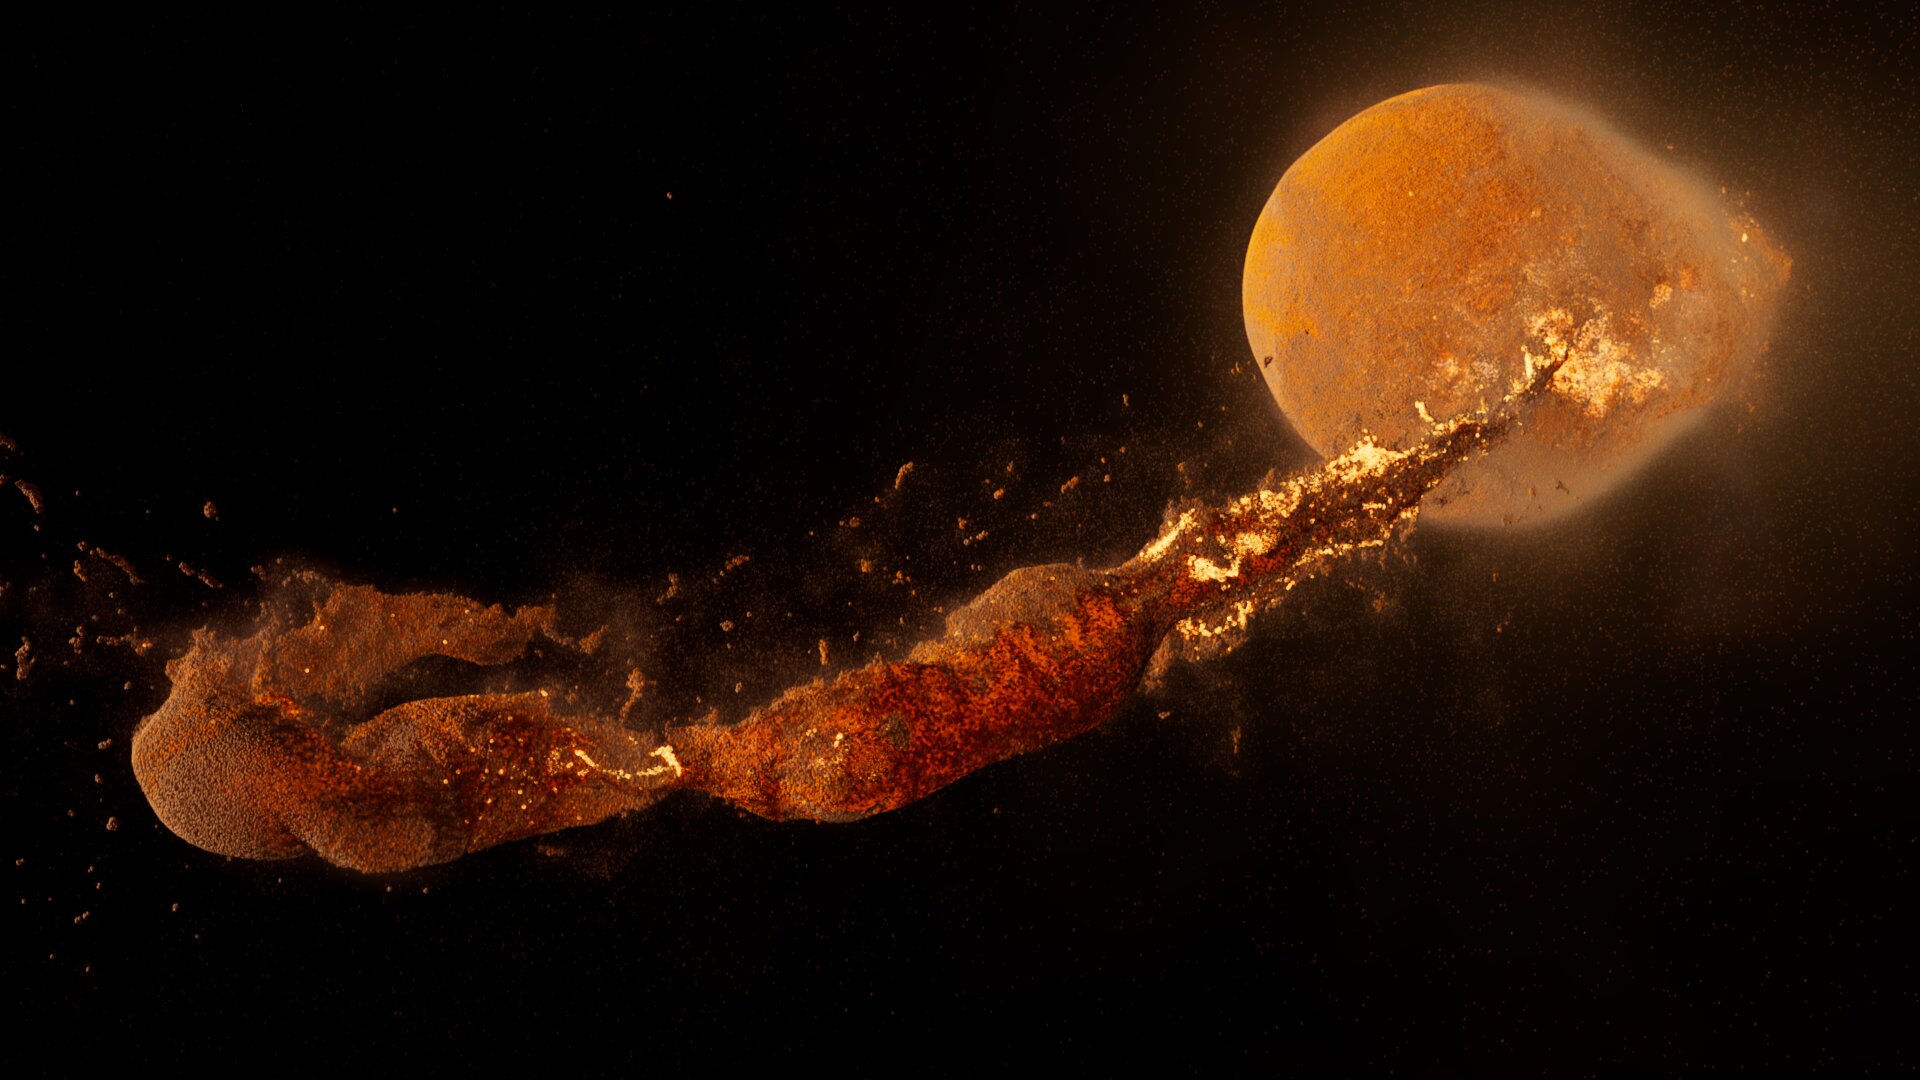 An illustration of how the Moon formed following a massive impact. Image Credit: University of Durham.